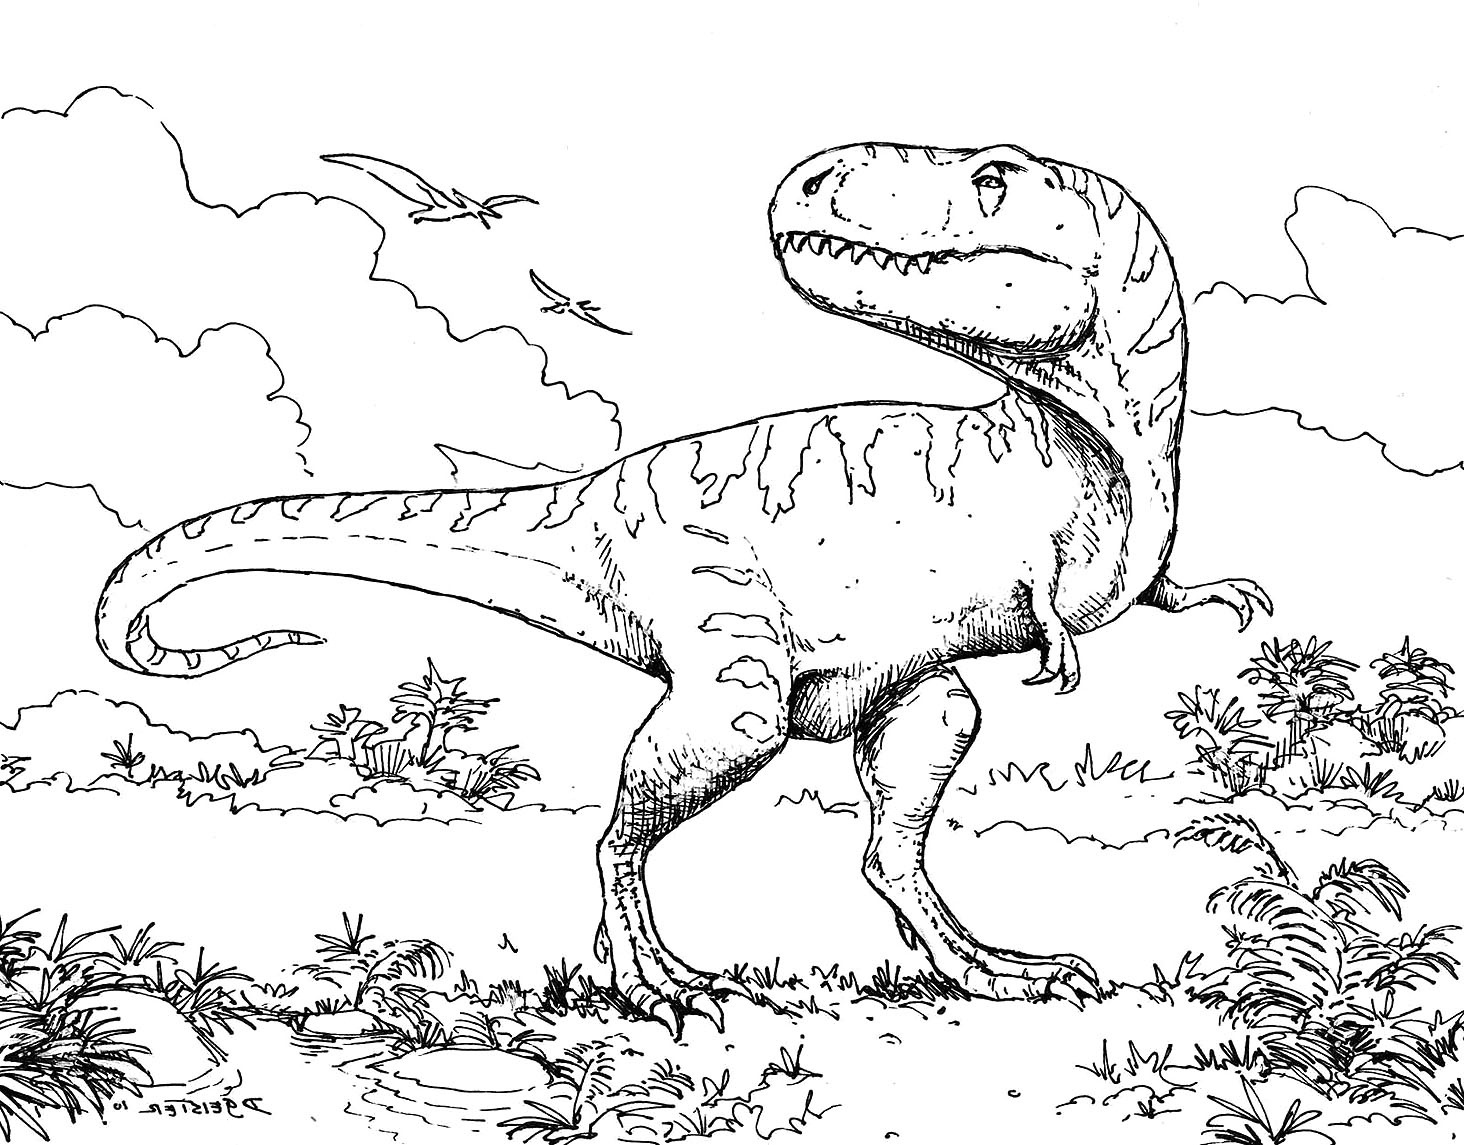 Dinosaur Coloring Pages To Print At Getdrawings | Free For - Free Printable Dinosaur Coloring Pages